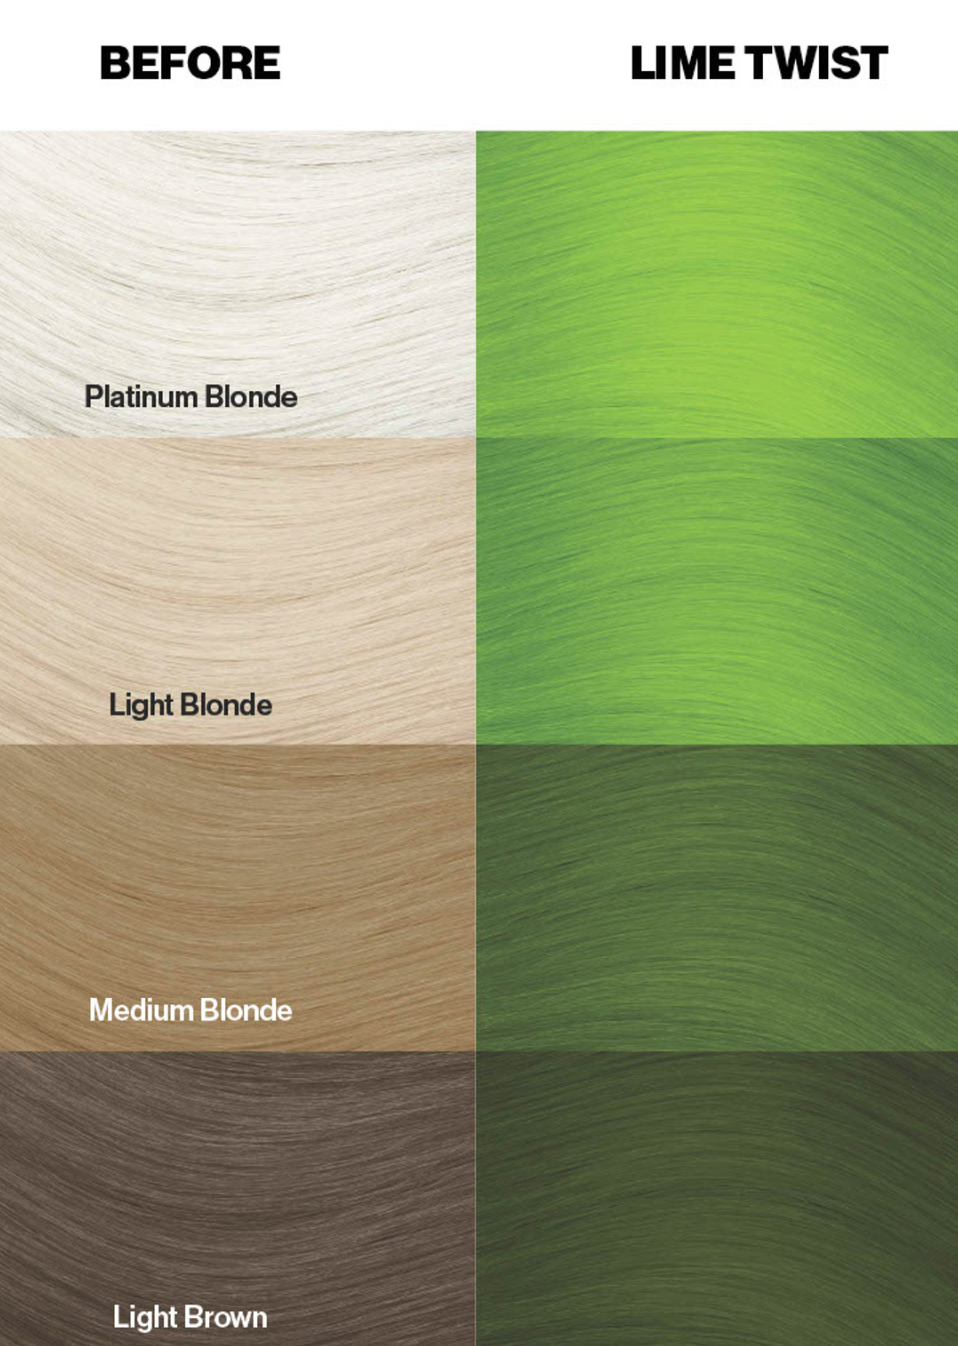 the different shades of hair are shown